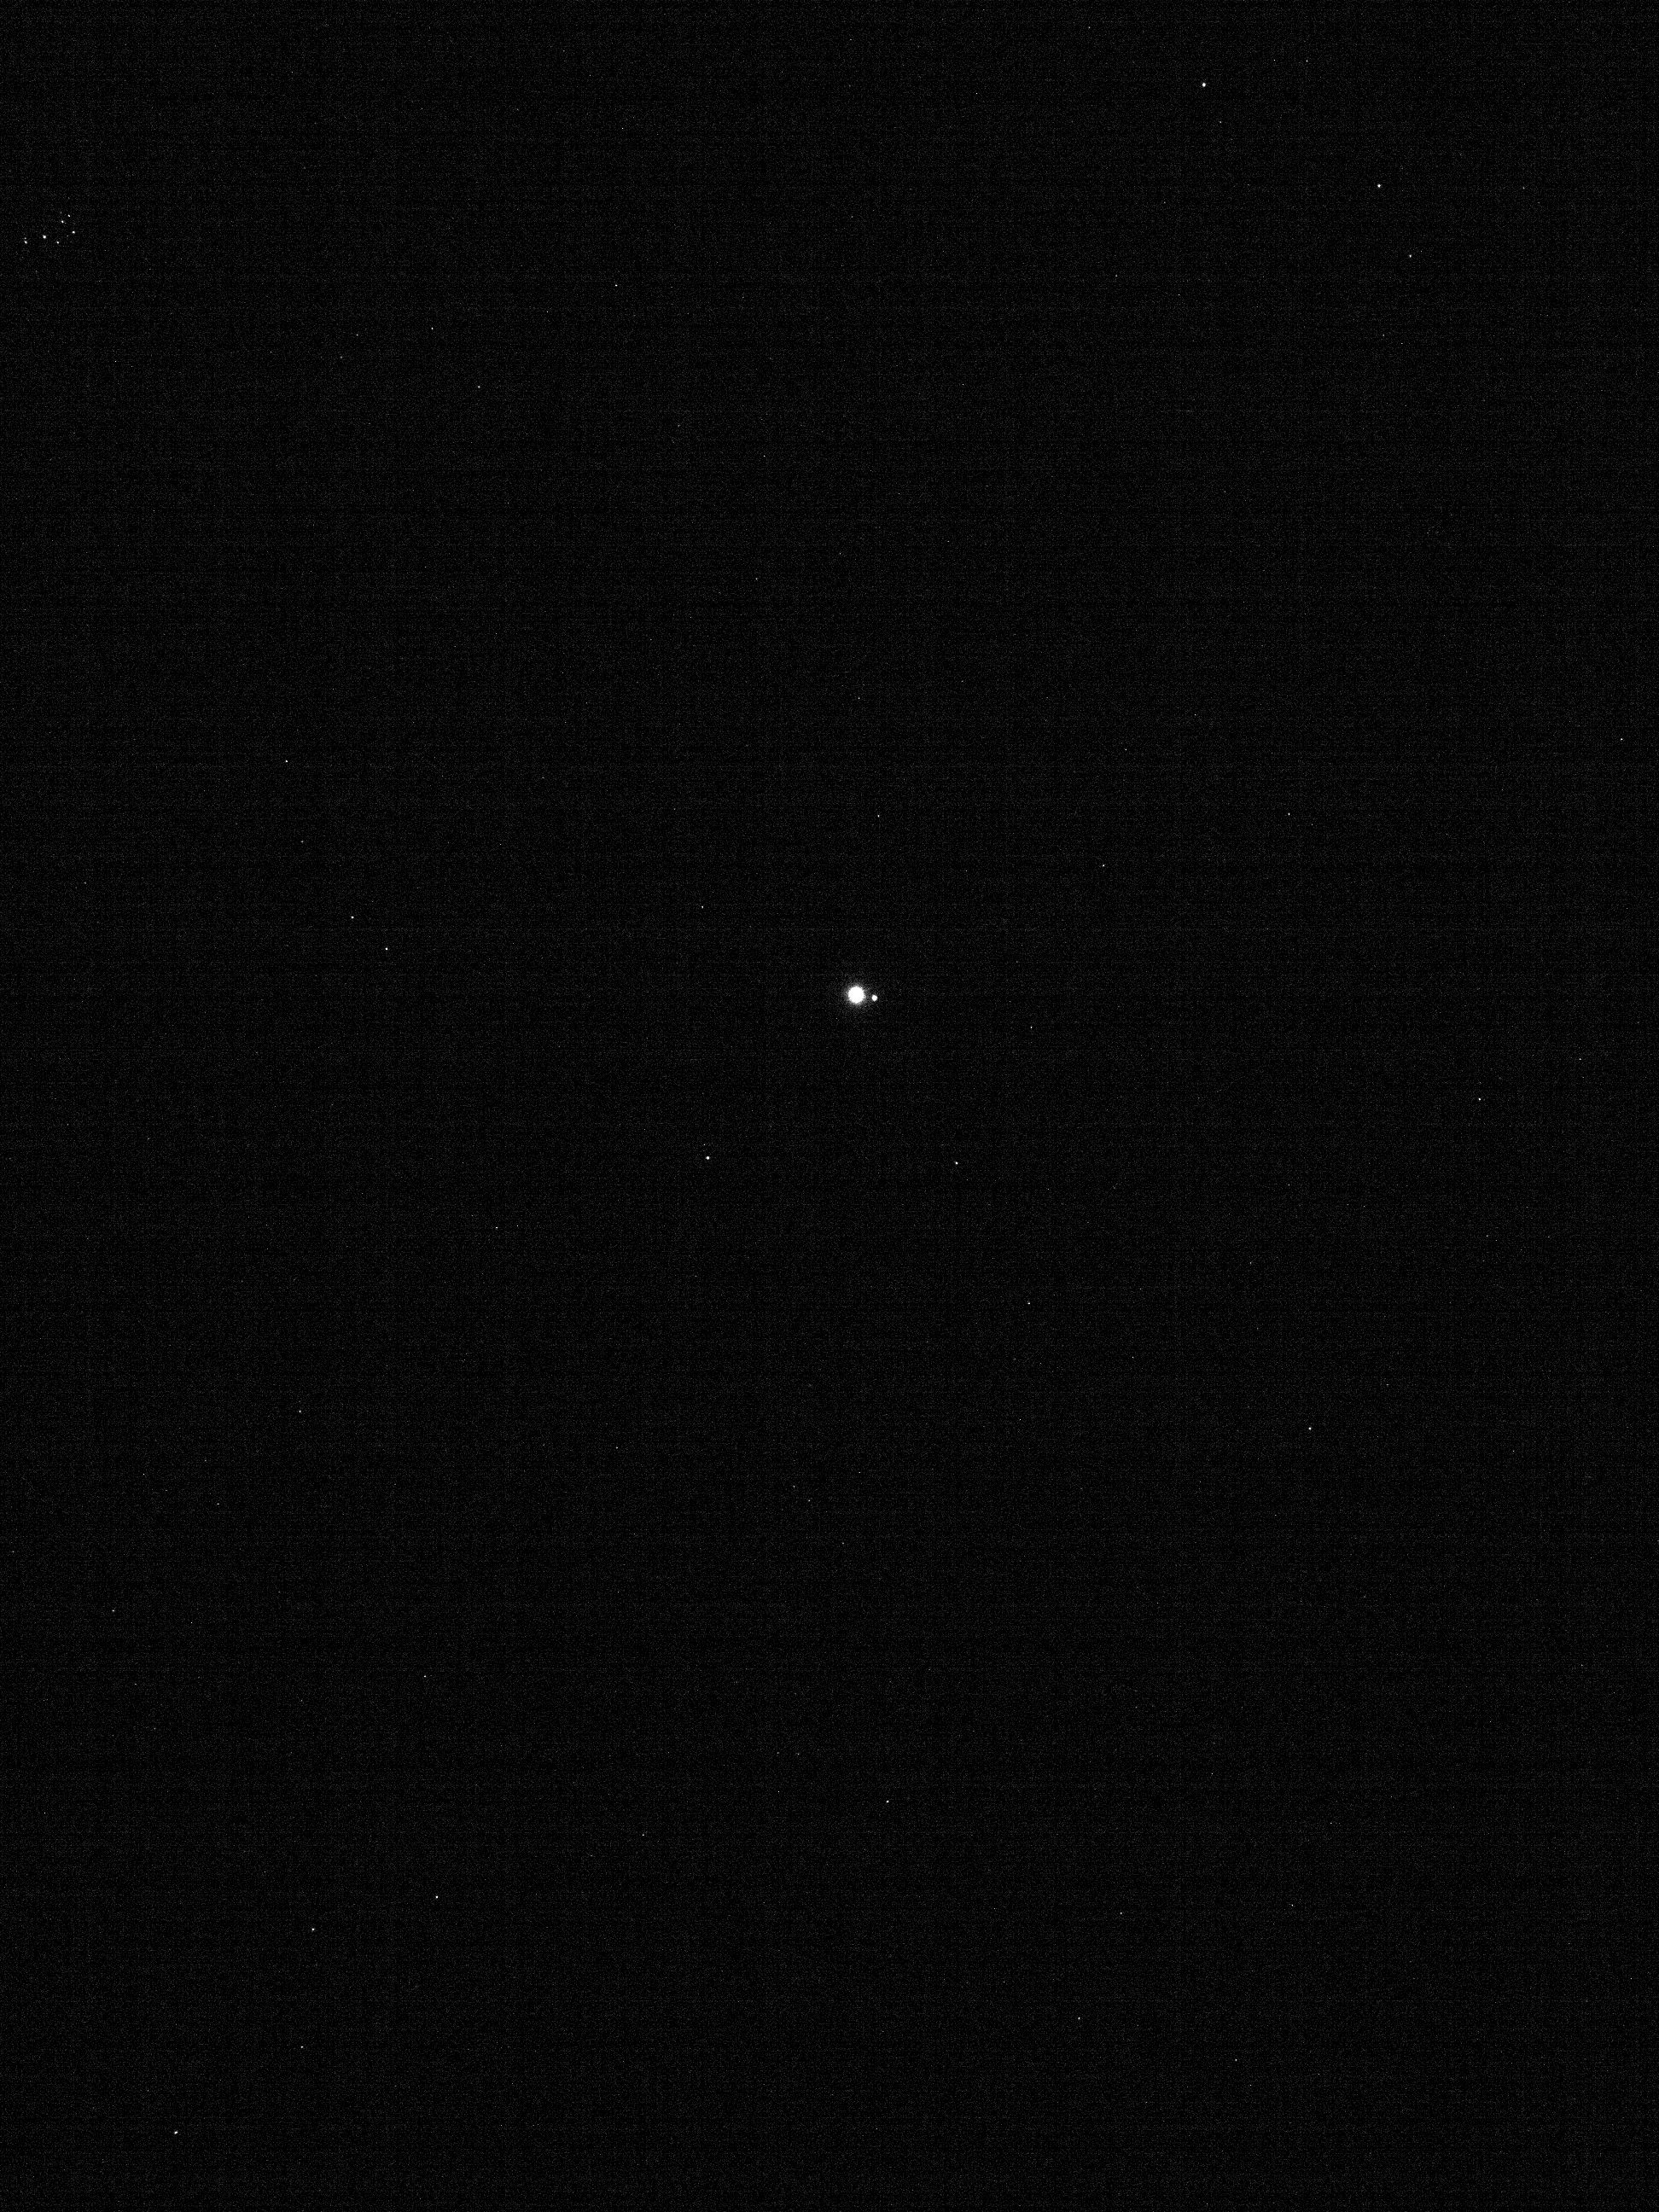 Image from NASA, acquired by the OSIRIS-REx NavCam1 imager on January 17, 2018, as part of an engineering test. The spacecraft had travelled nearly 64 million kilometers and saw the Earth and Moon as a few pixels of reflected sunlight. 